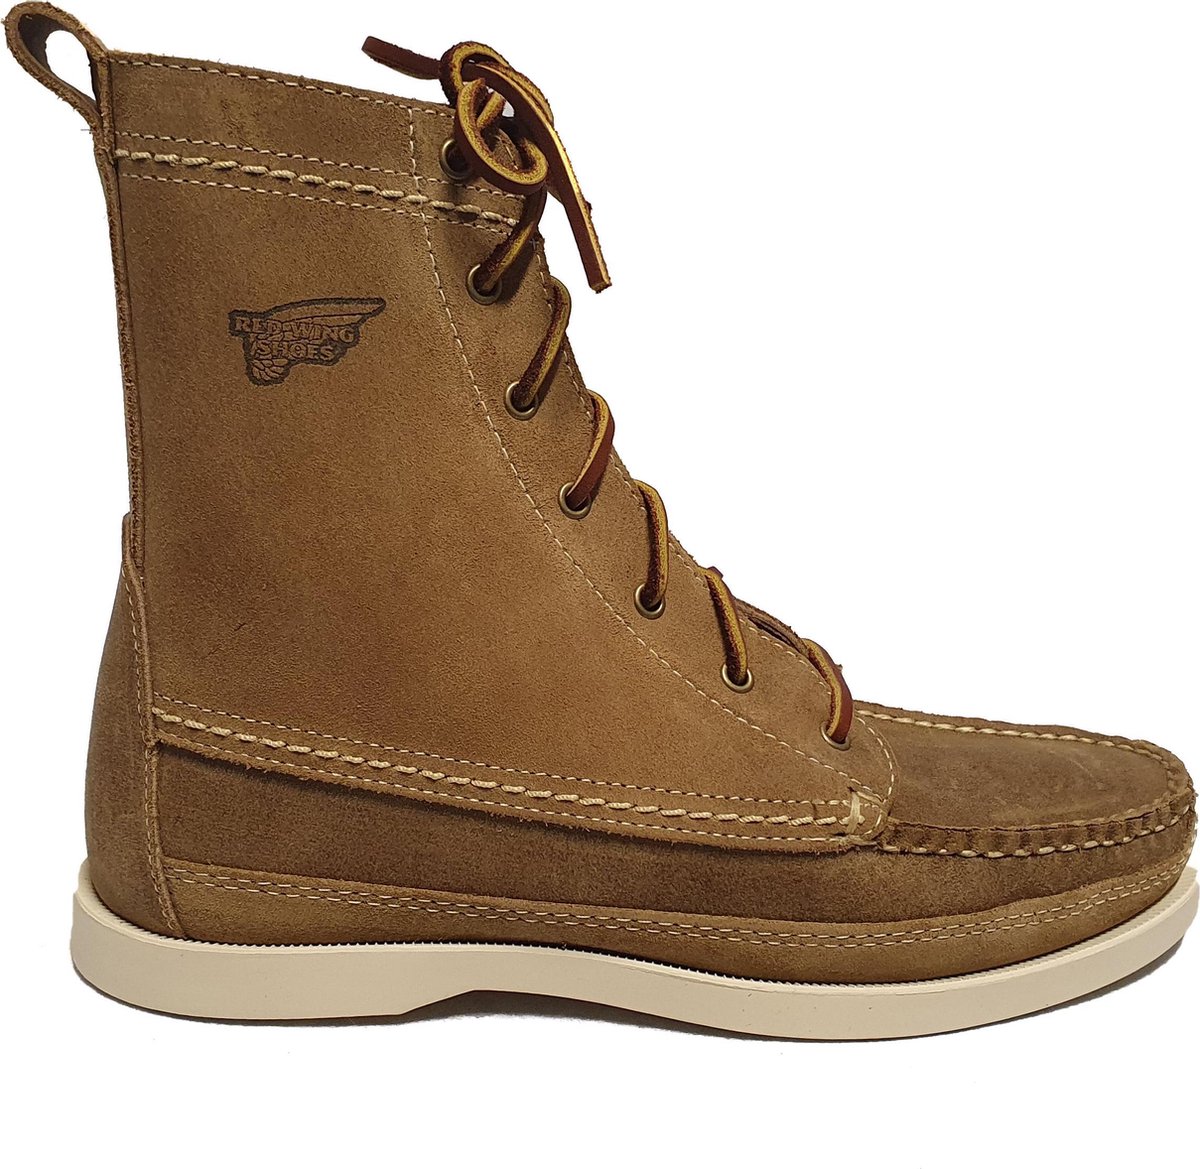 Red Wing Wabasha Boat Boot Suede 07190 Camel EU 44